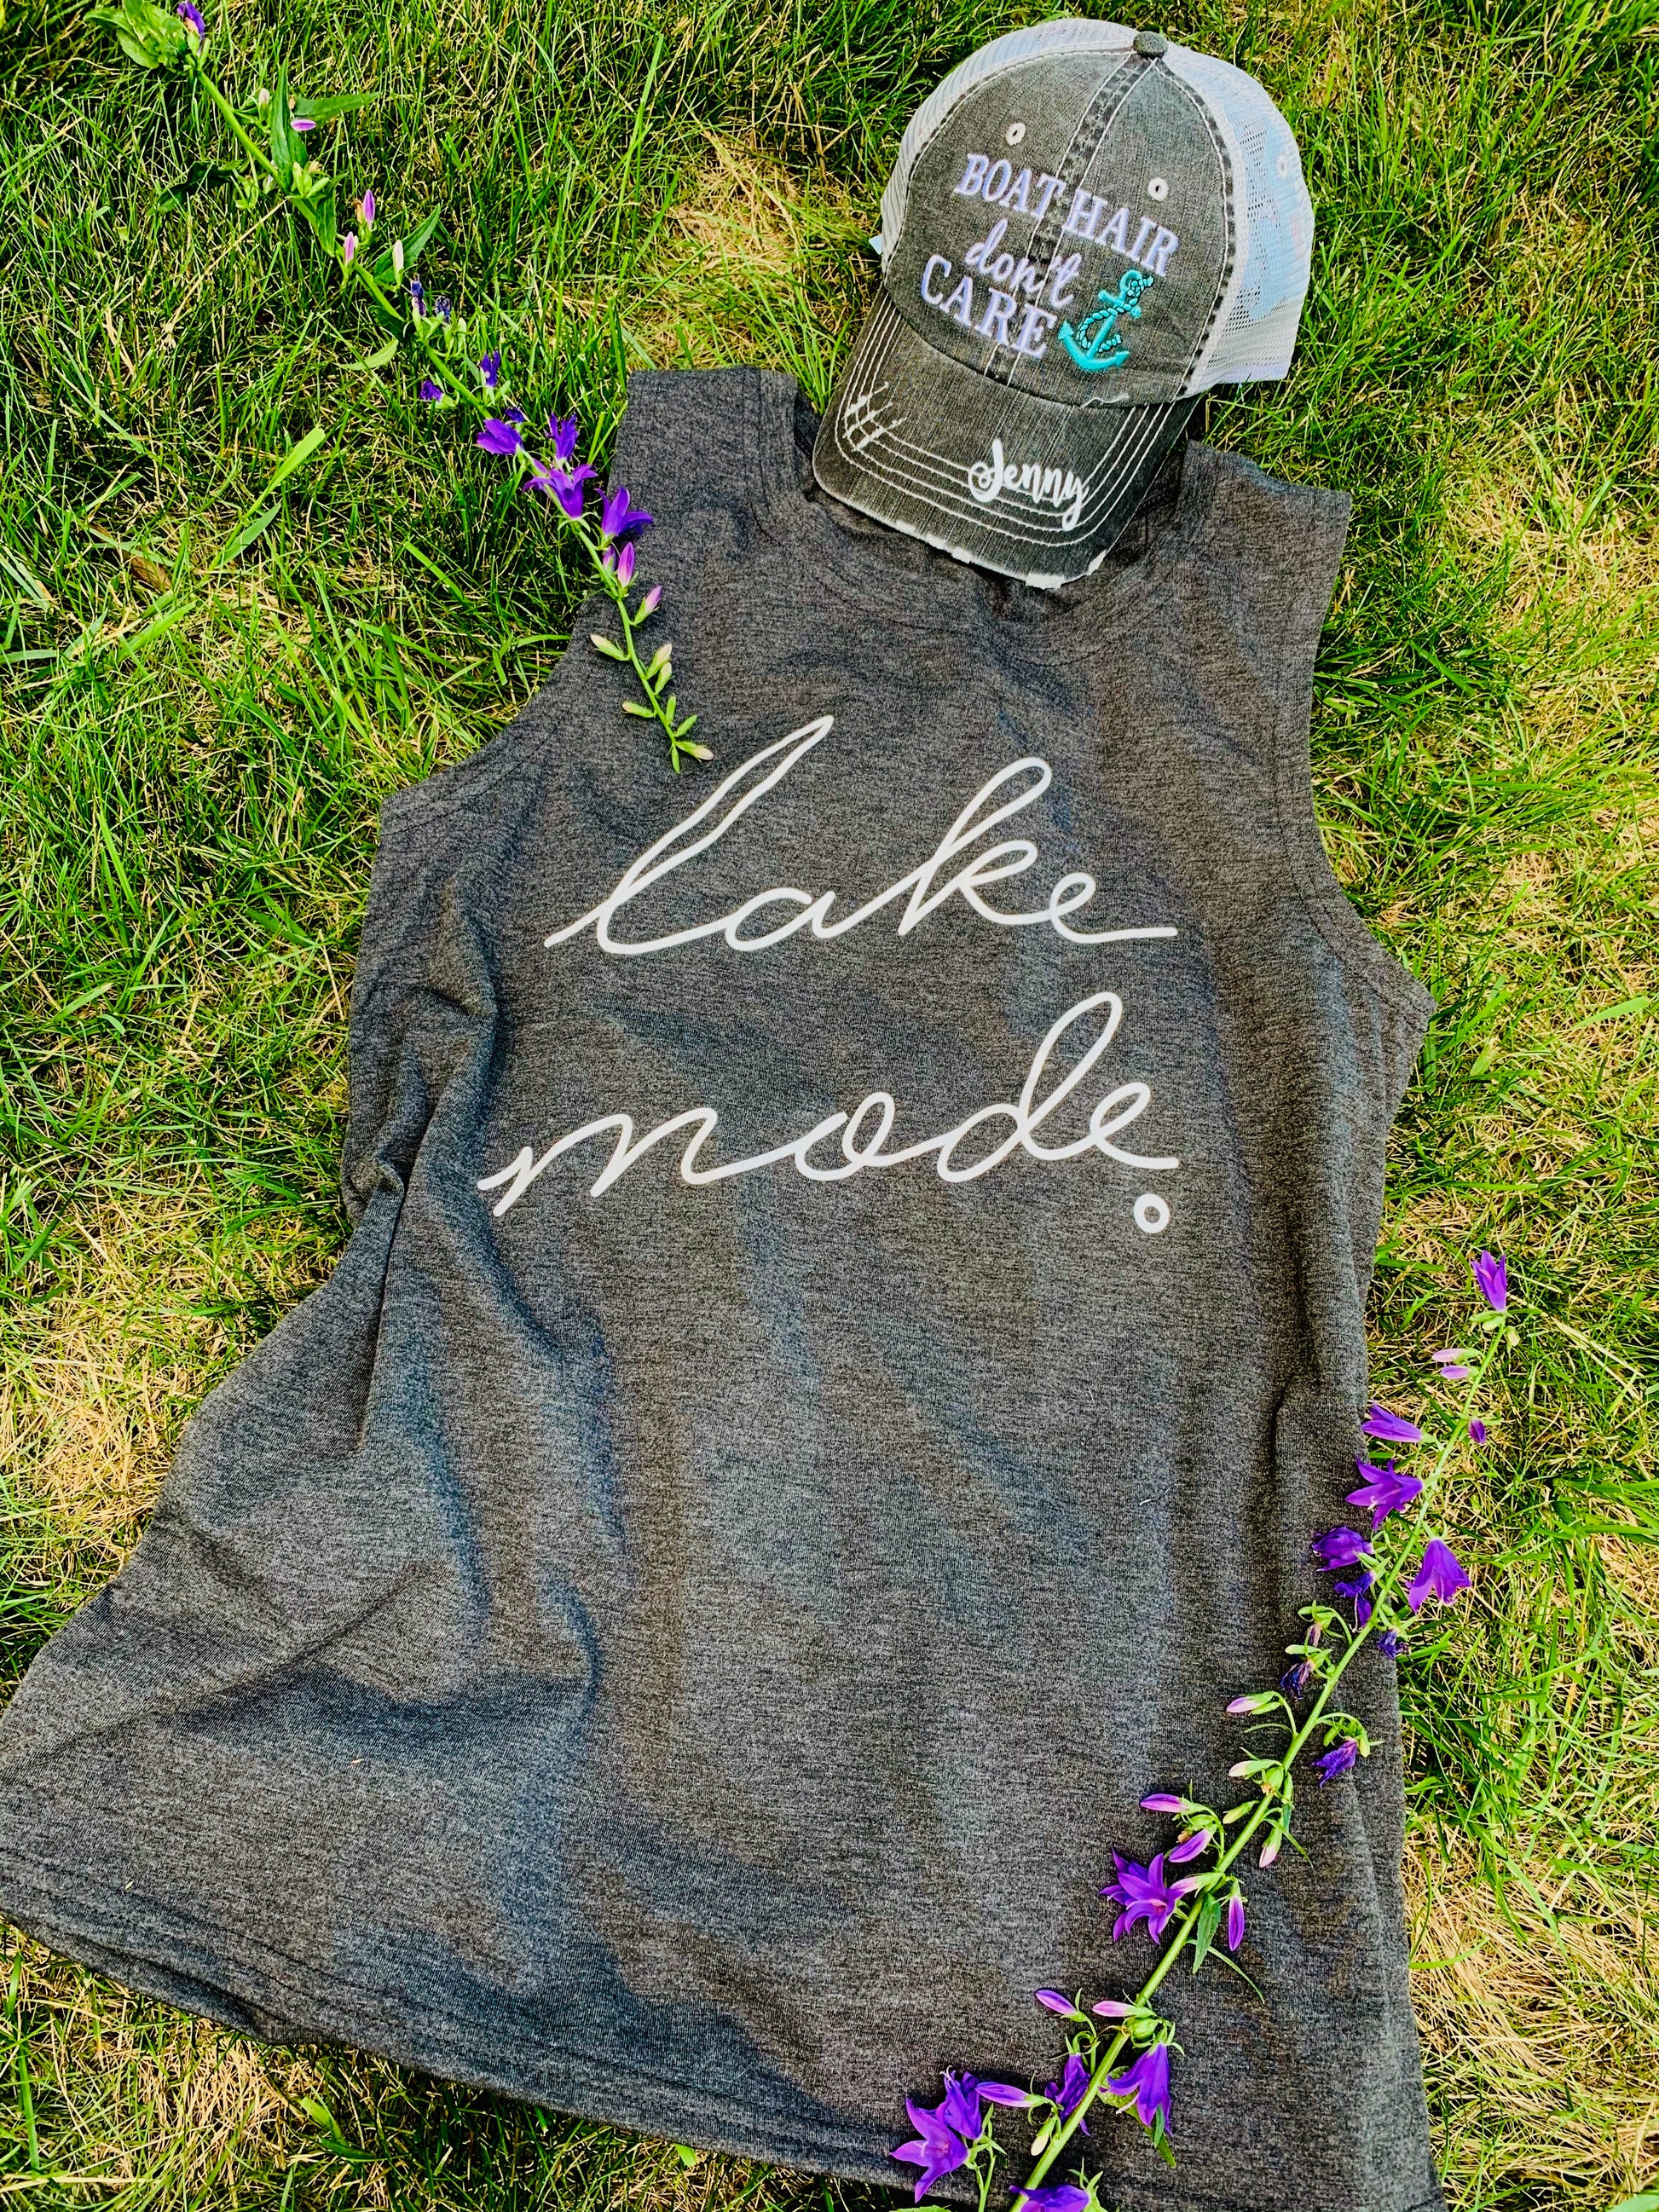 Tank top and T-shirts { Lake mode } Lake clothing. - Stacy's Pink Martini Boutique